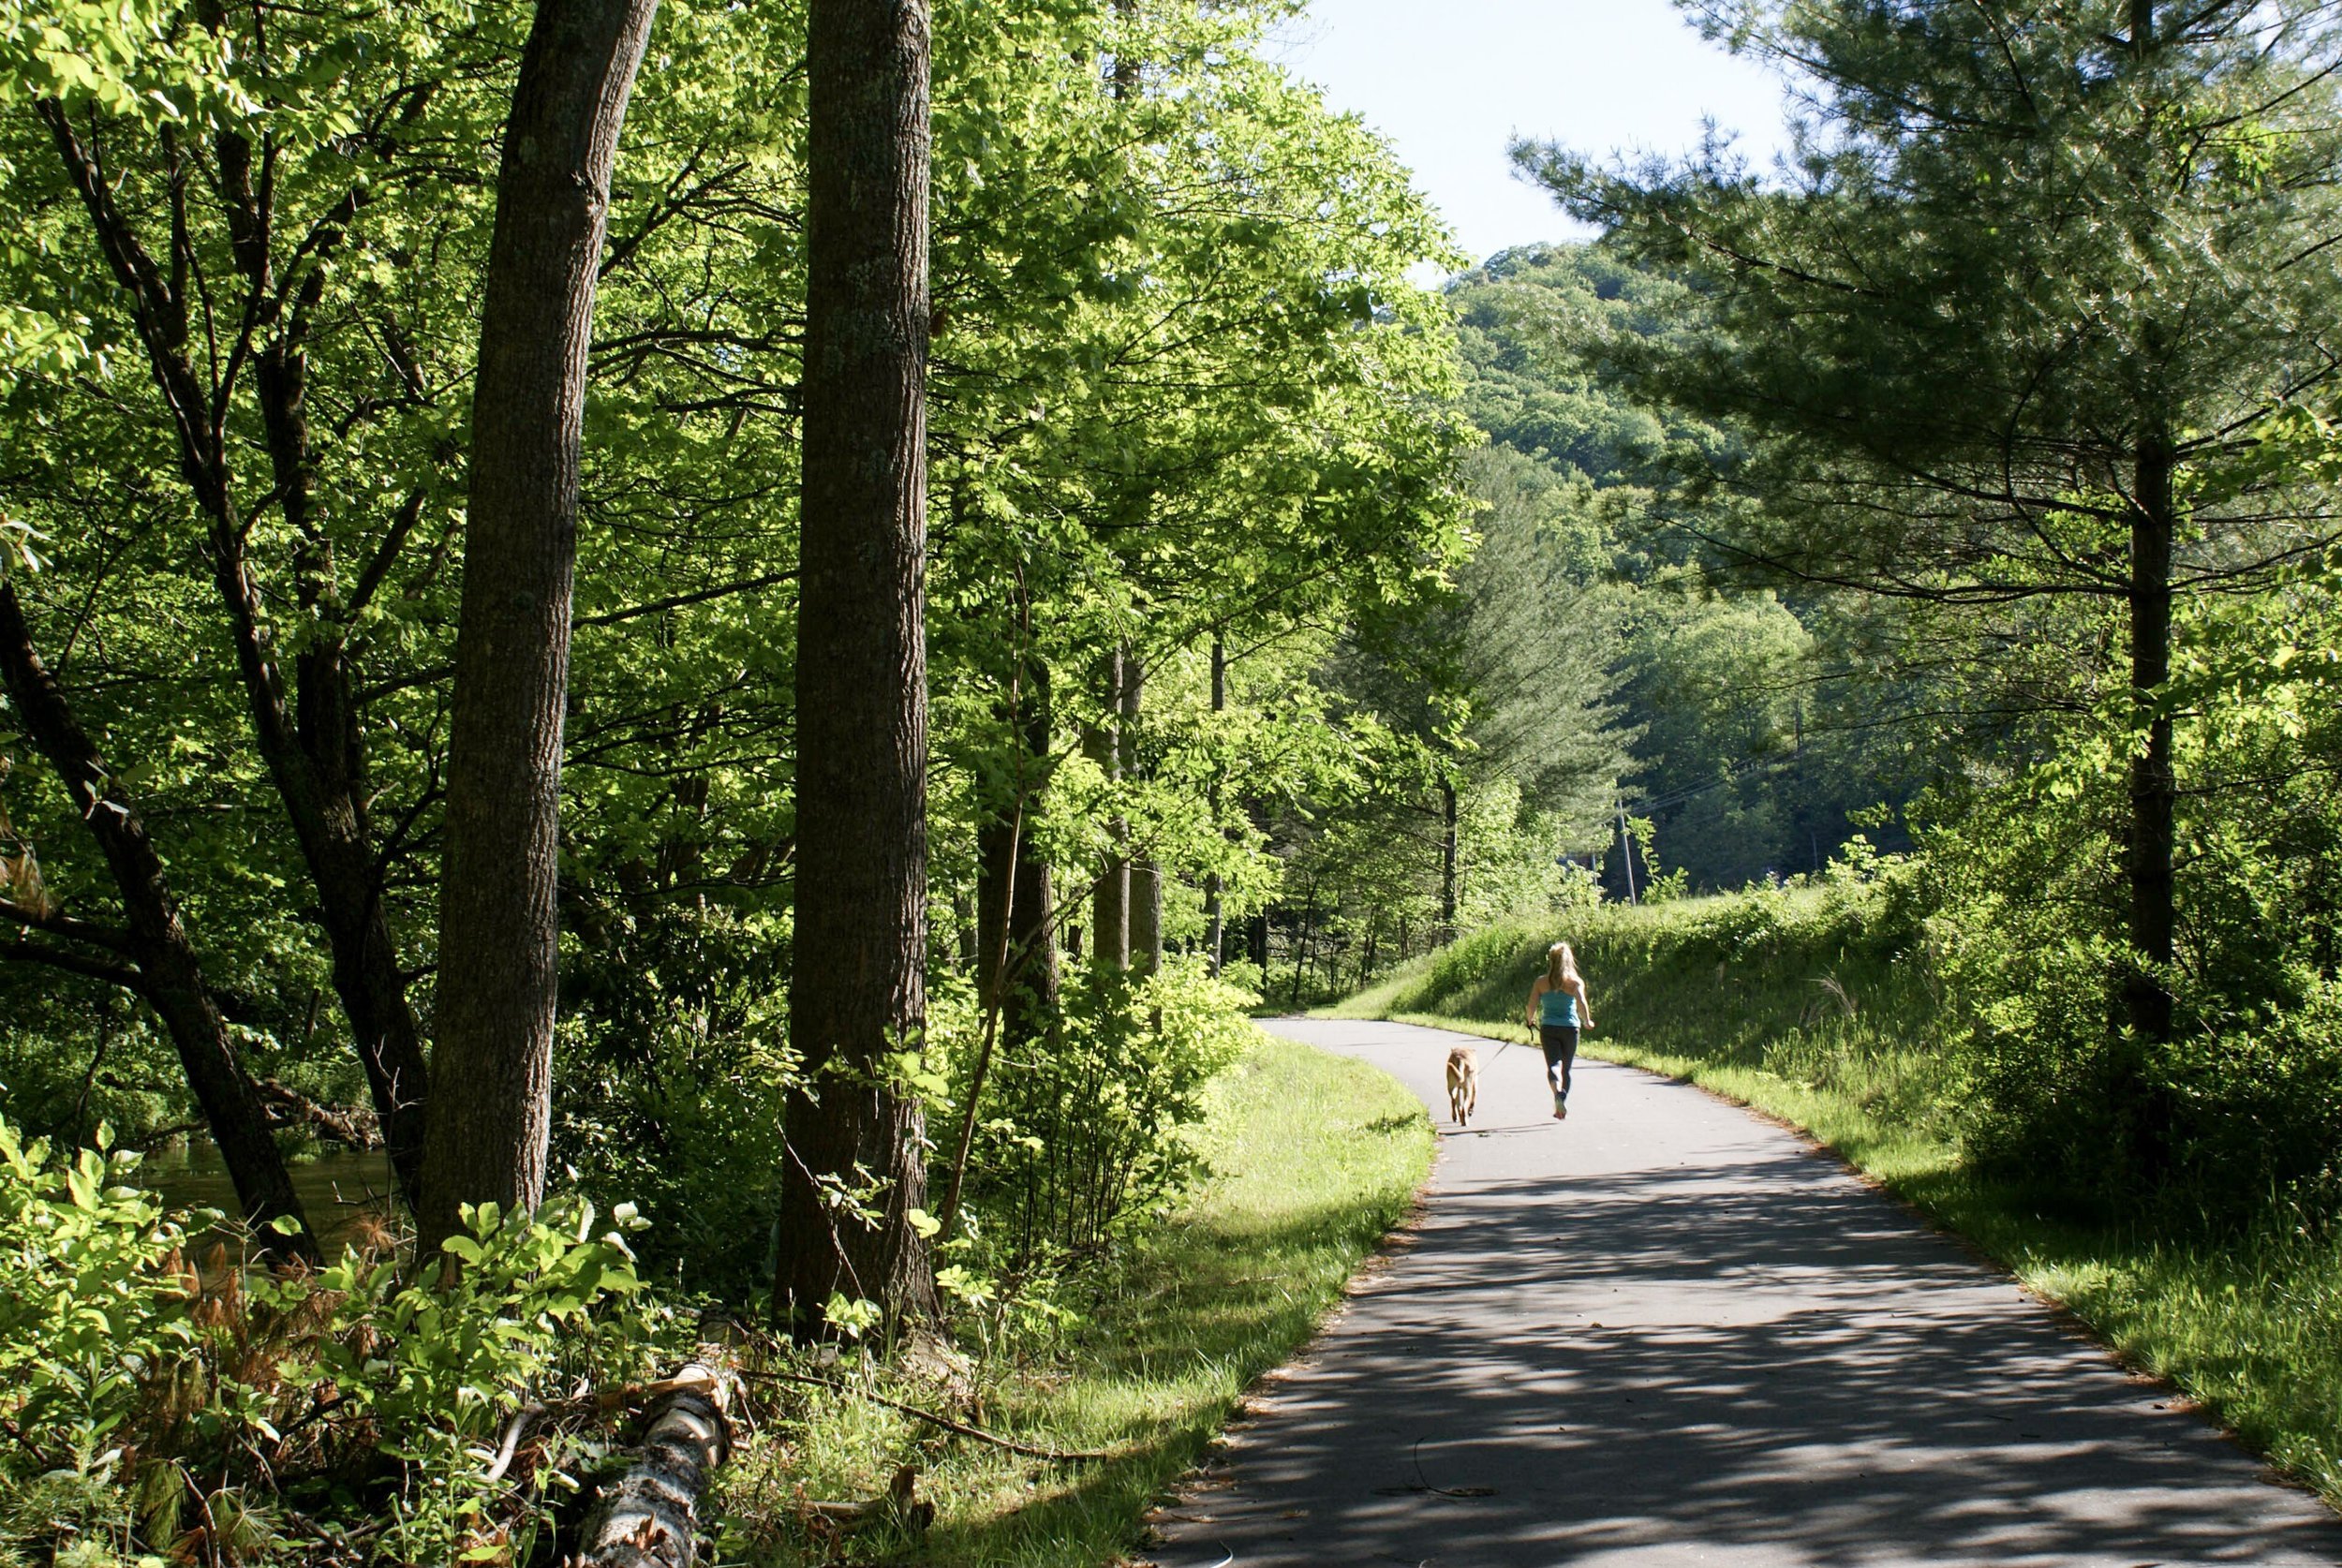 What are the benefits of having a greenway?